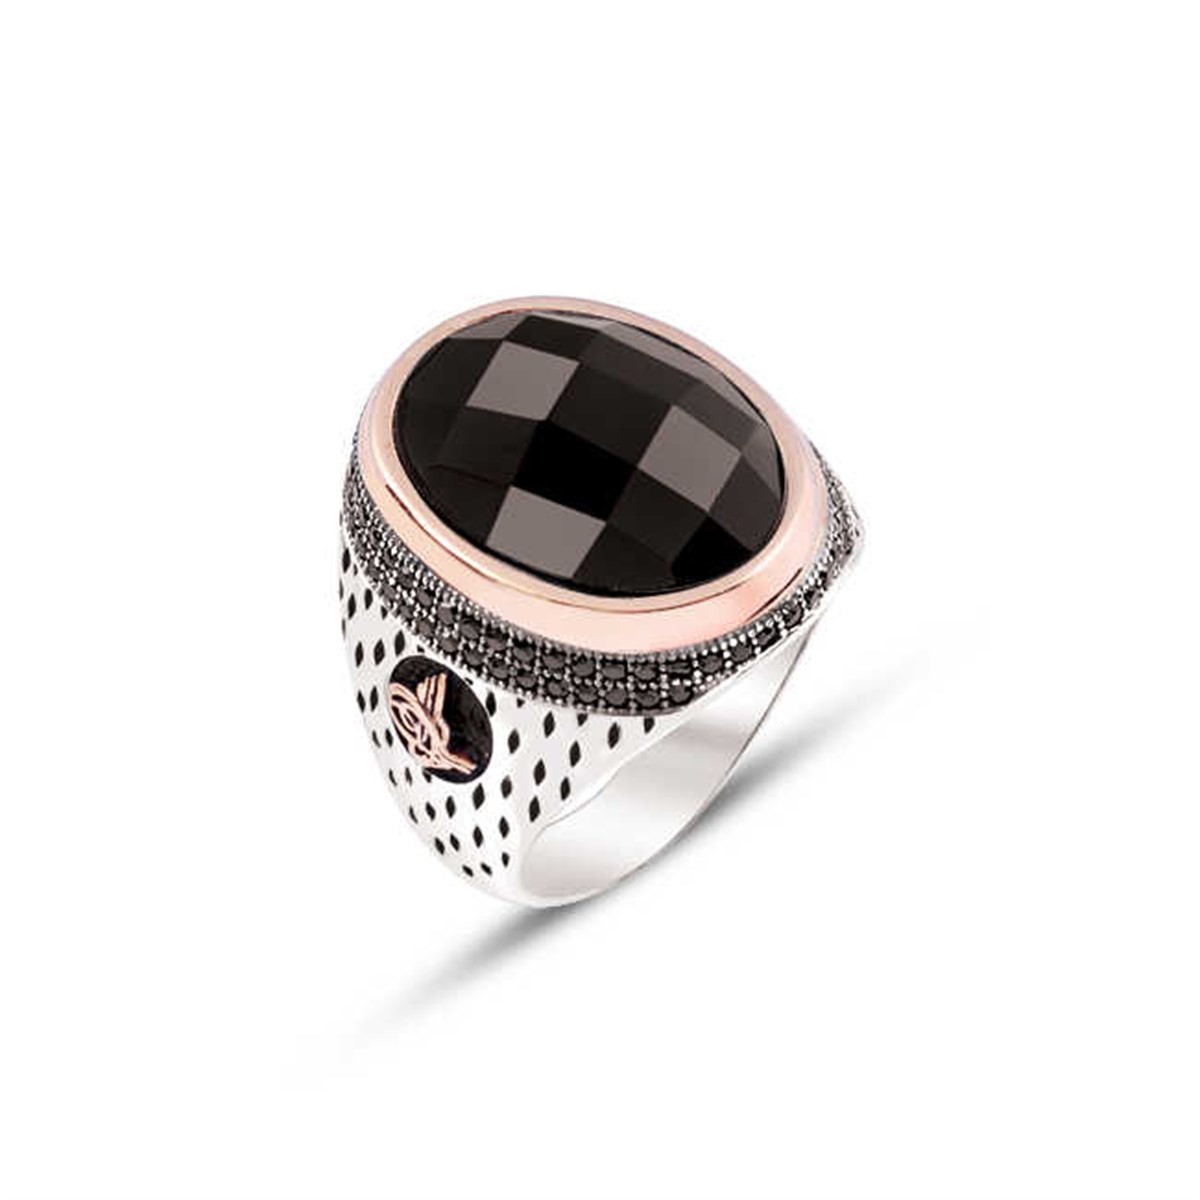 Silver Black Facet Stone Embroidered Men's Ring